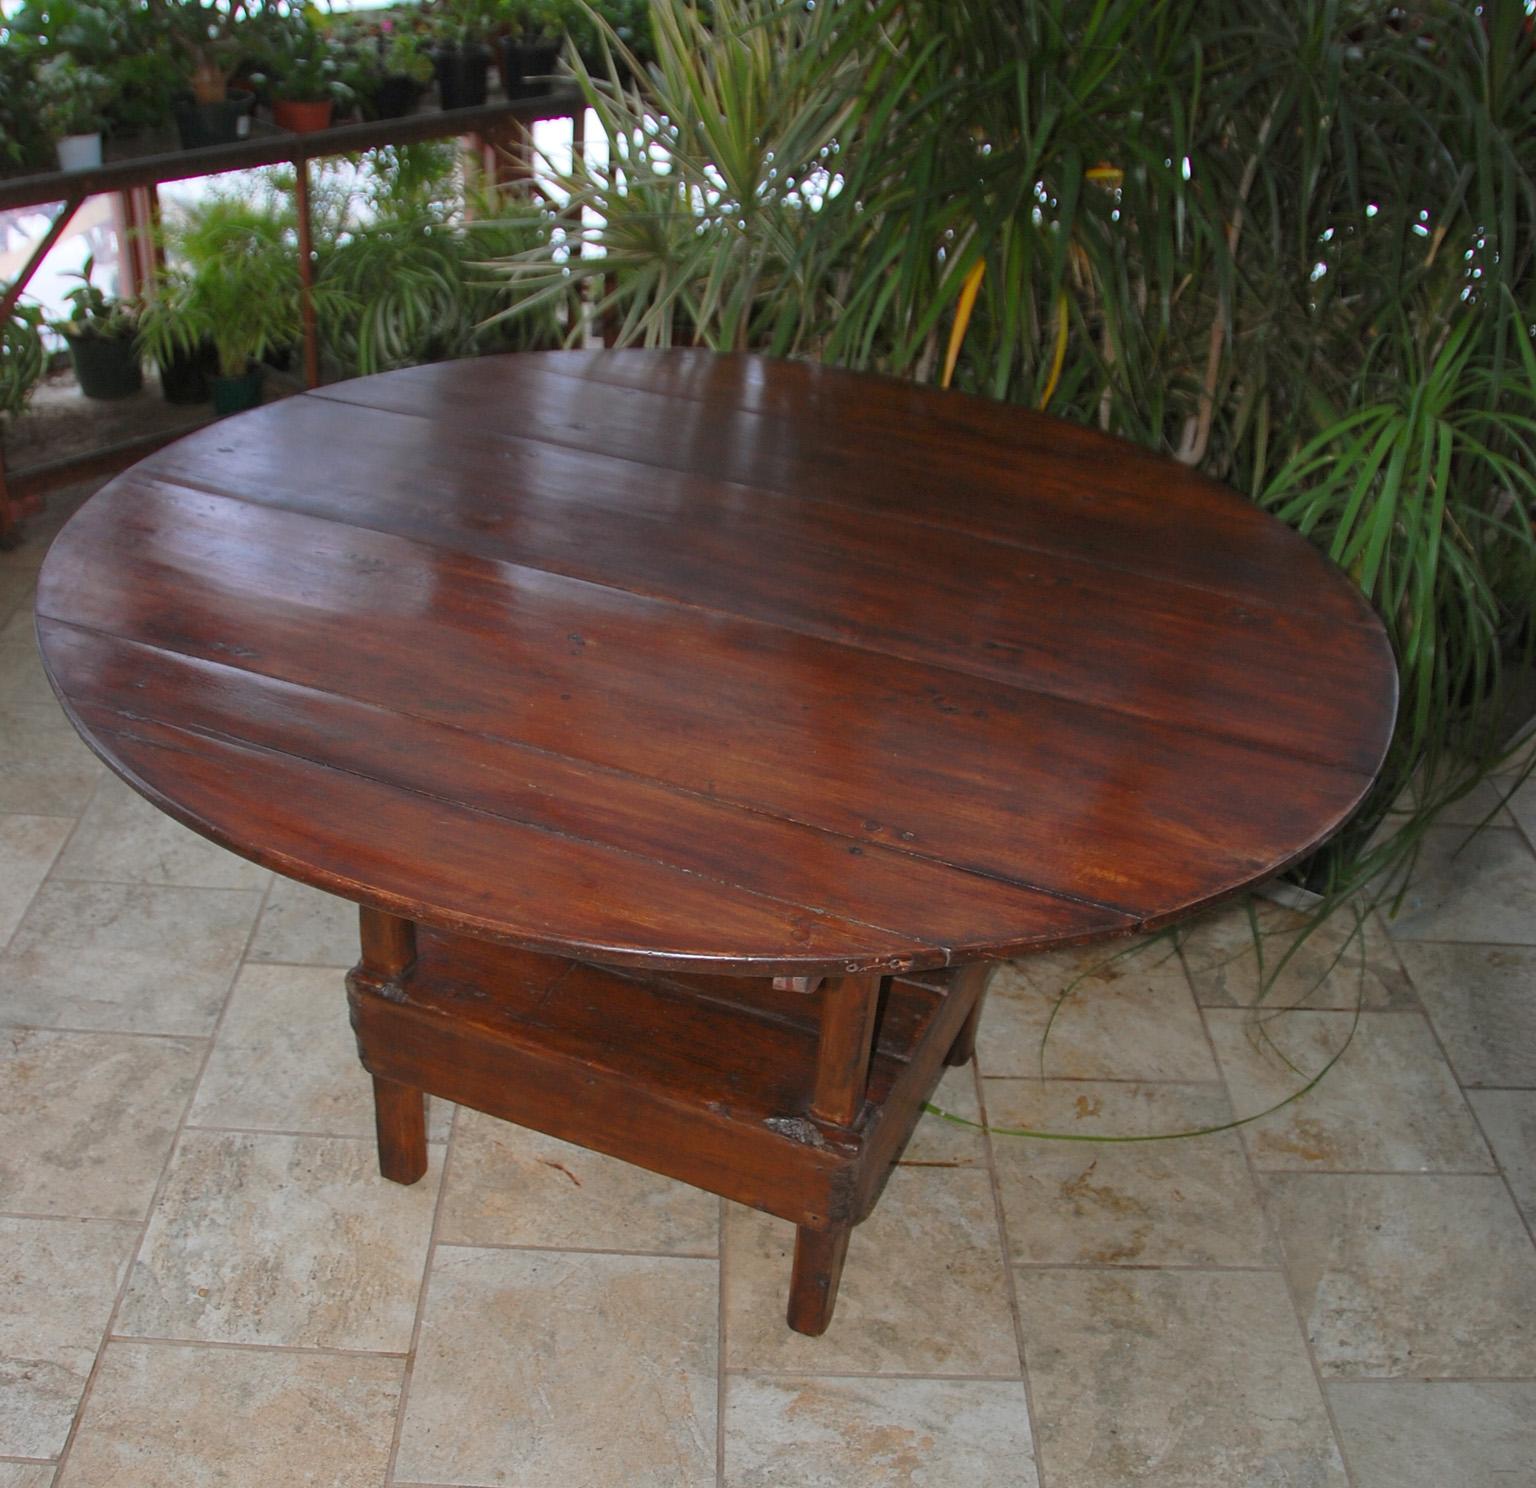 American Colonial metamorphic table chair in pine. This 48 inch round table was a practical answer to making two things for the price of one and making a small room more flexible. When one wanted to use a table for eating or working, the table top